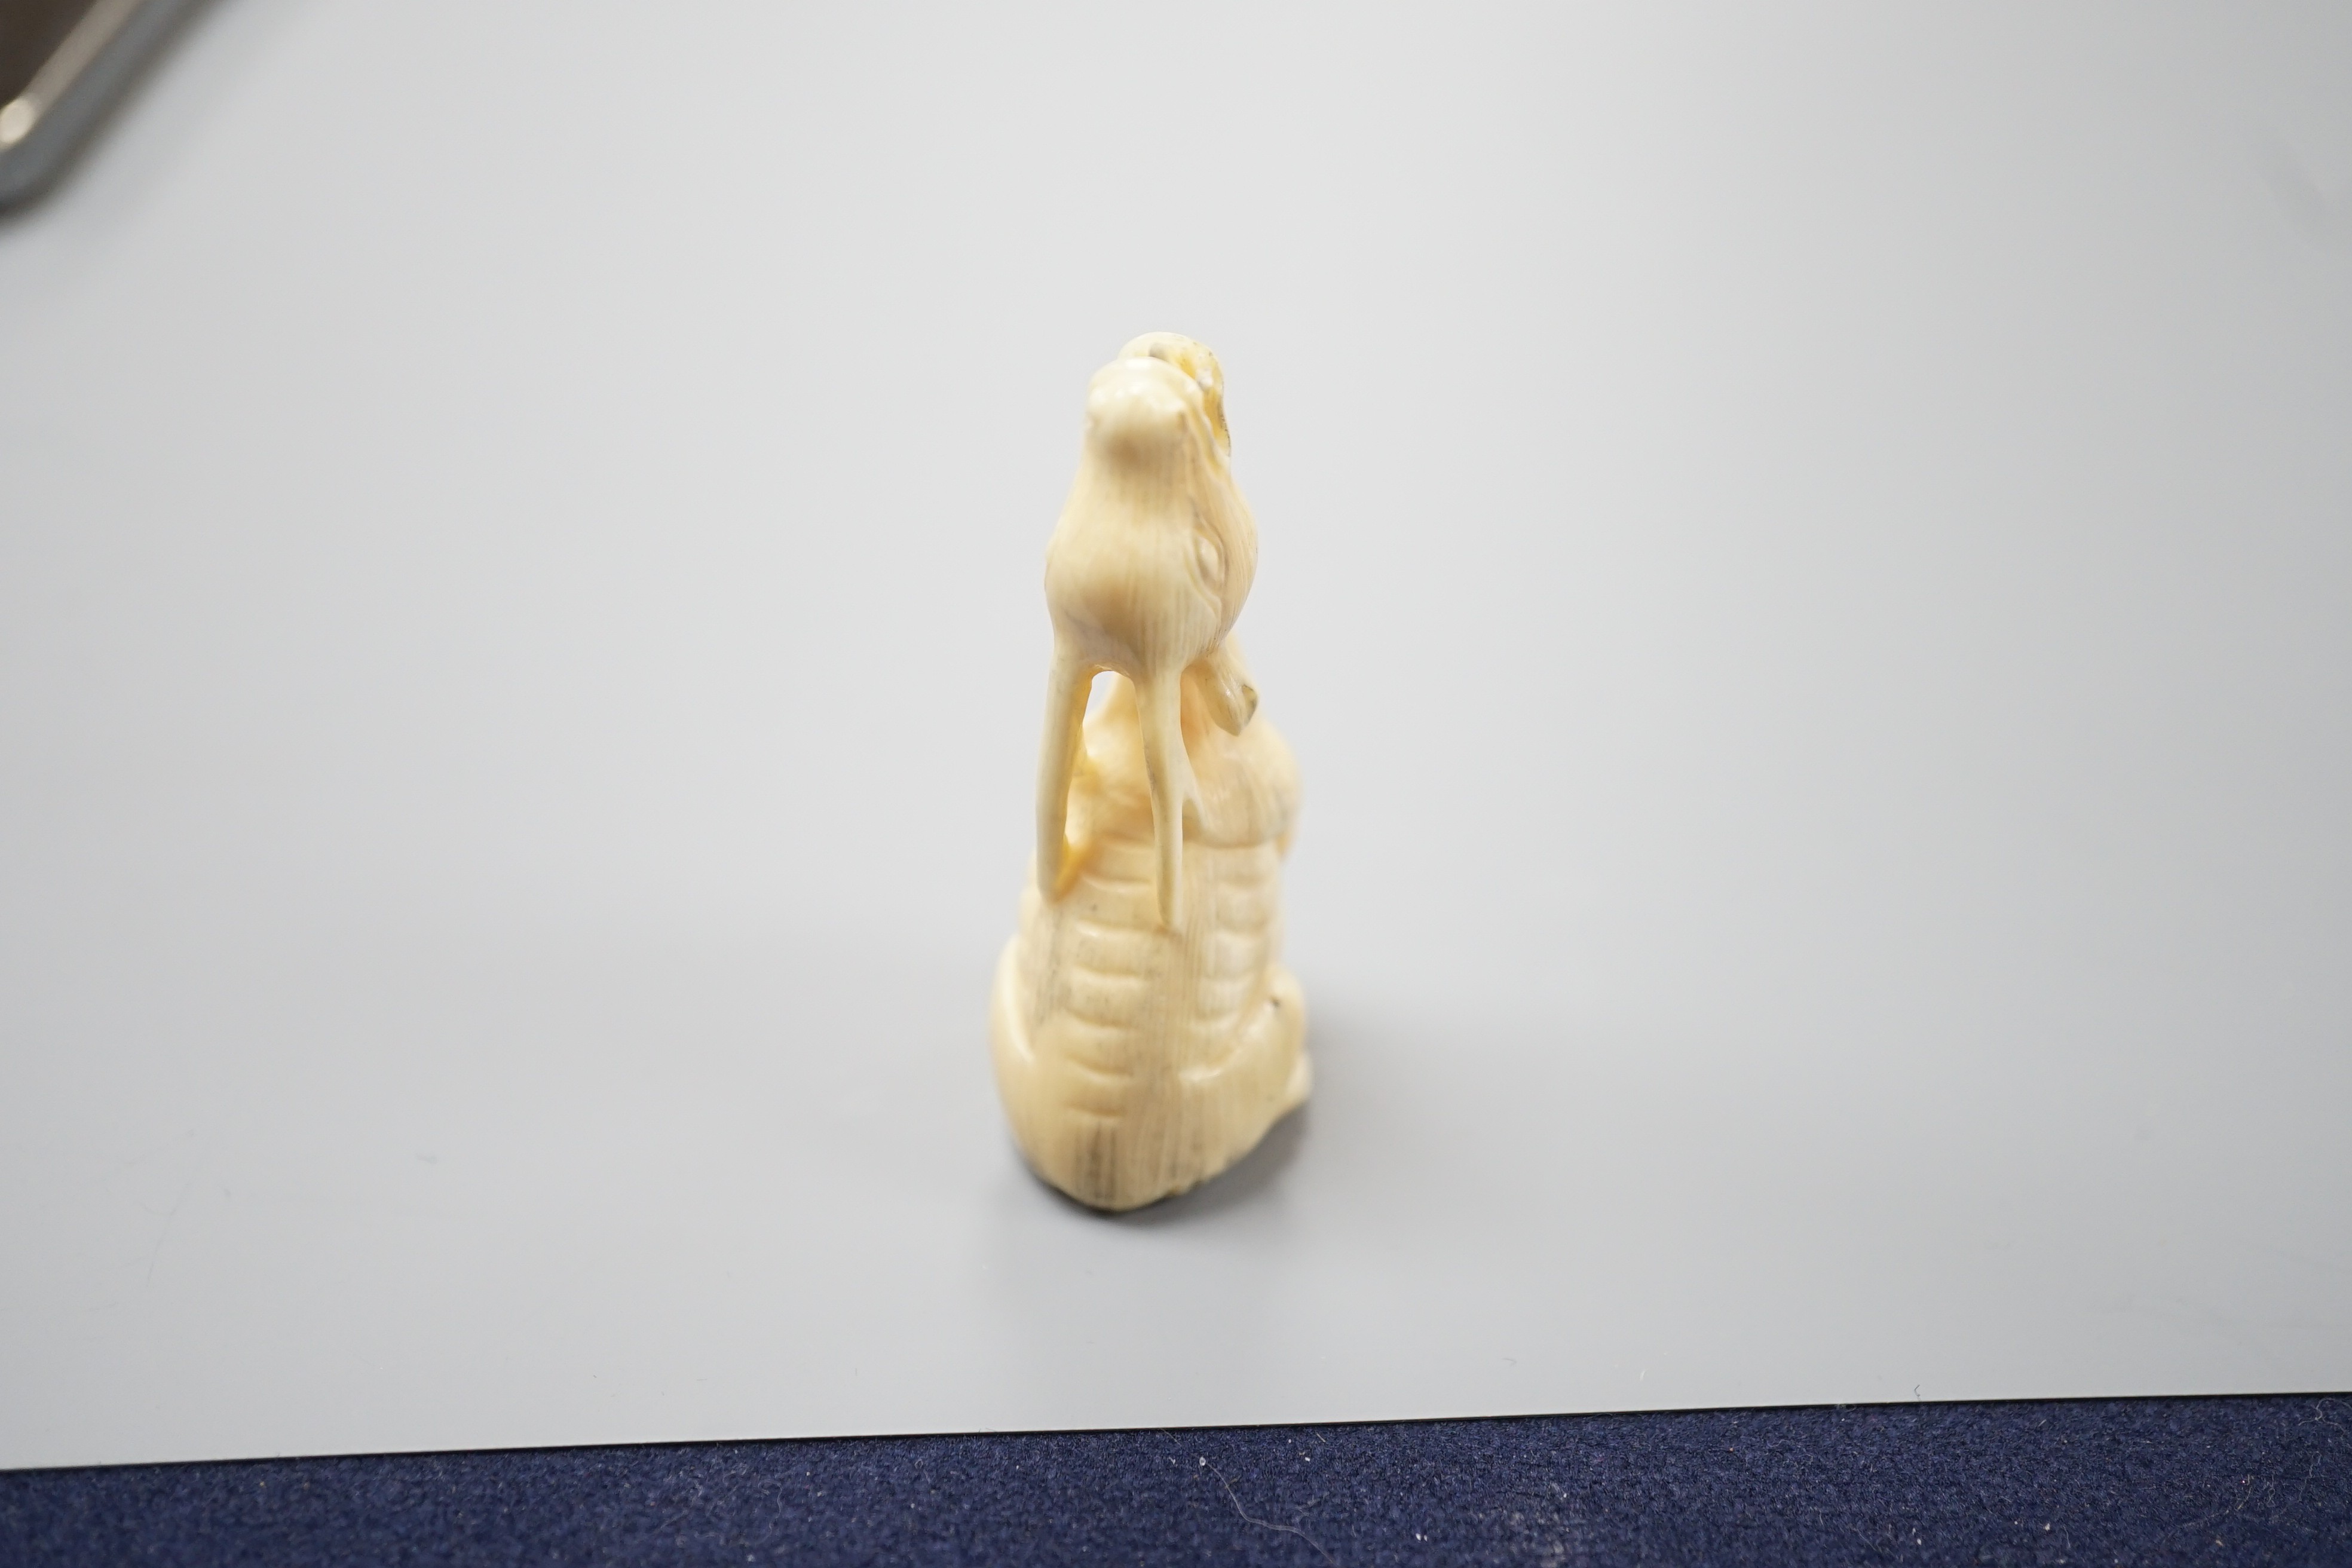 A Japanese ivory netsuke of a seated bellowing deer, 19th century, bears signature, 5.8cm